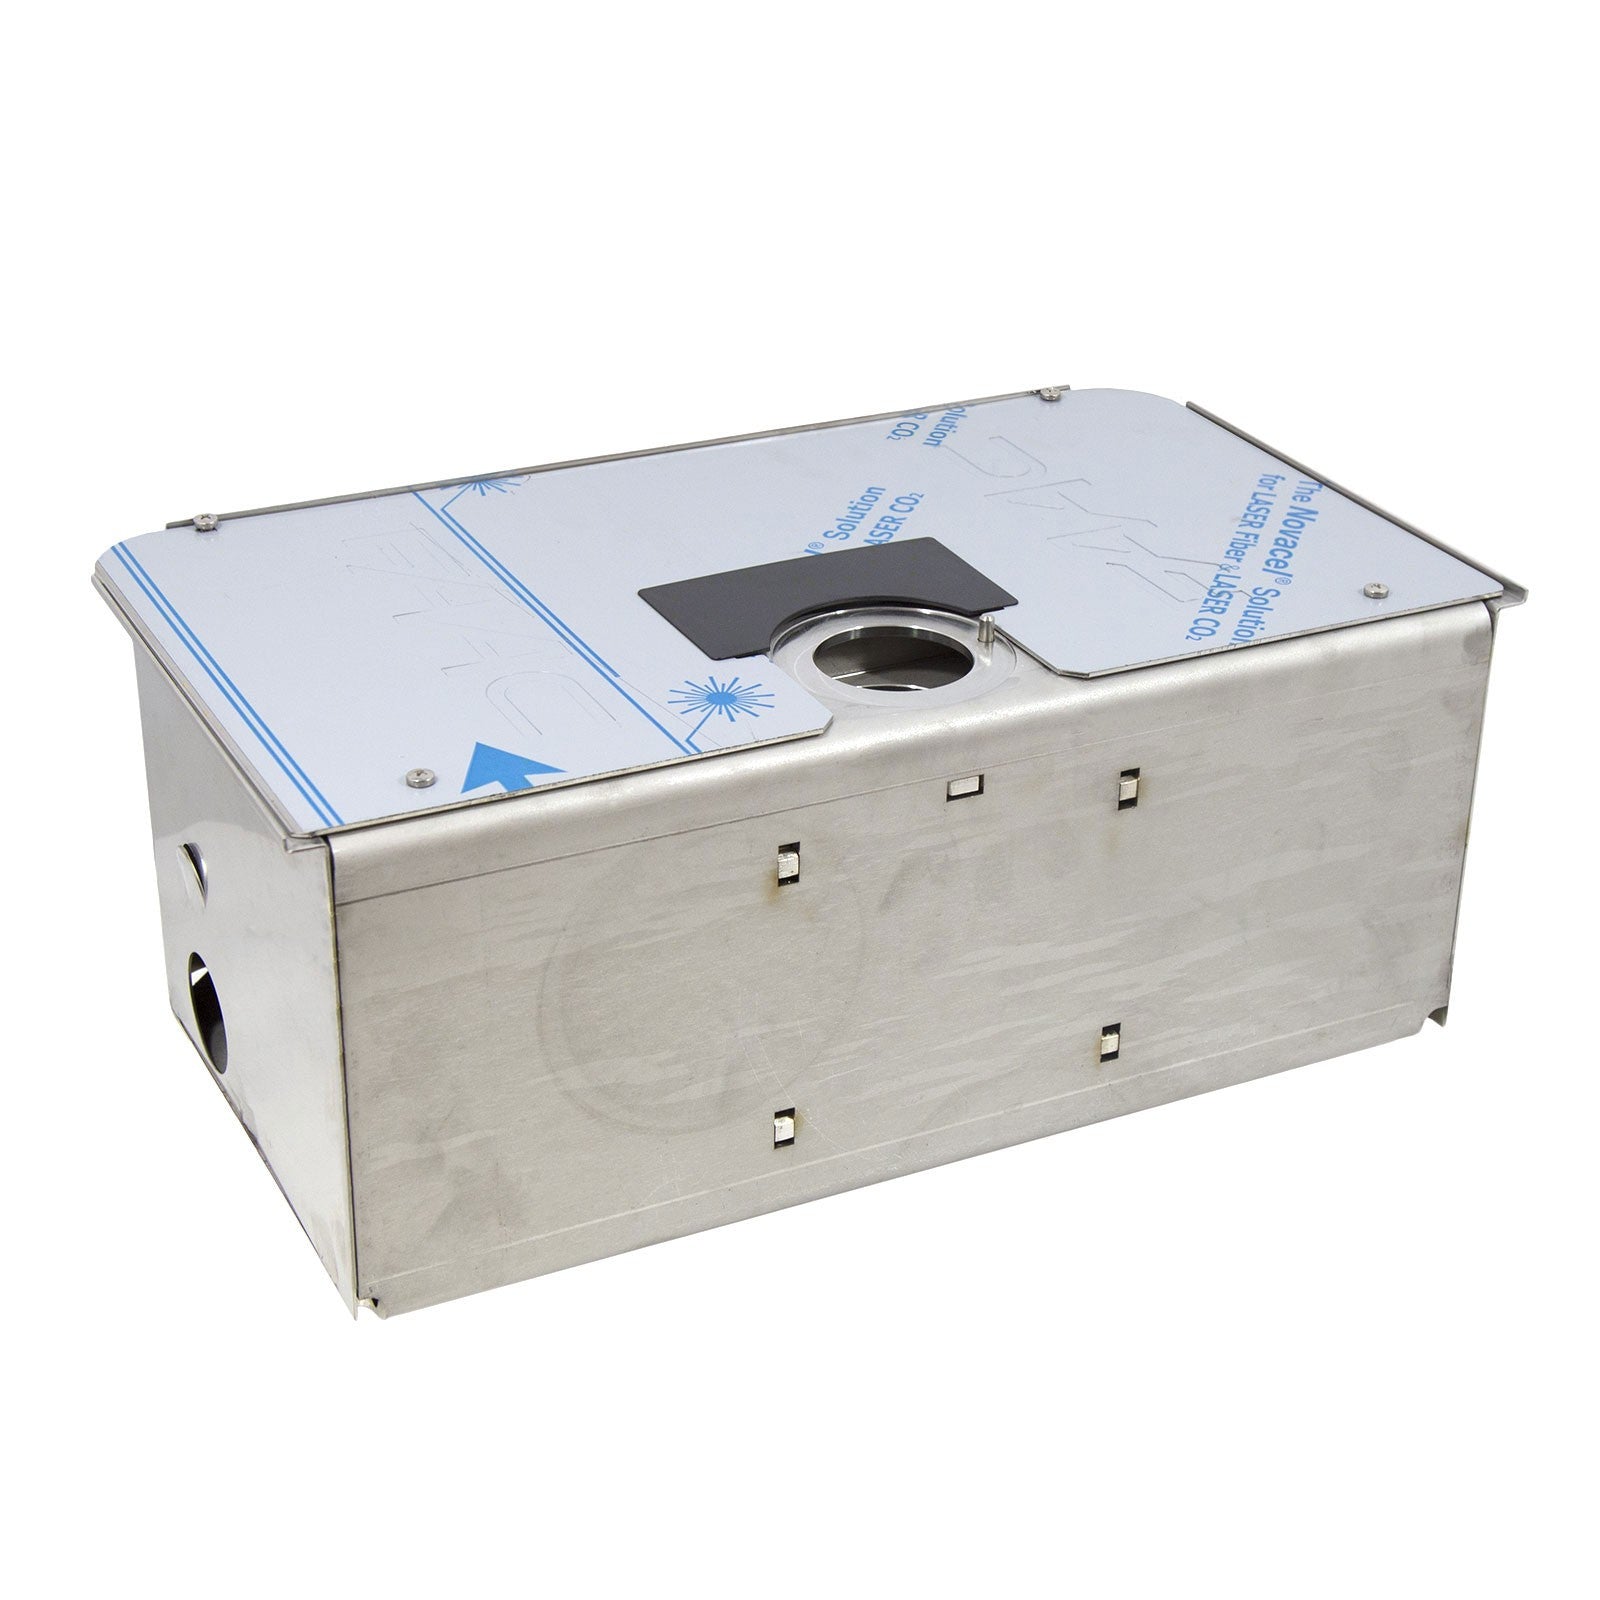 FAAC 490113 Load Bearing Box, Stainless Steel